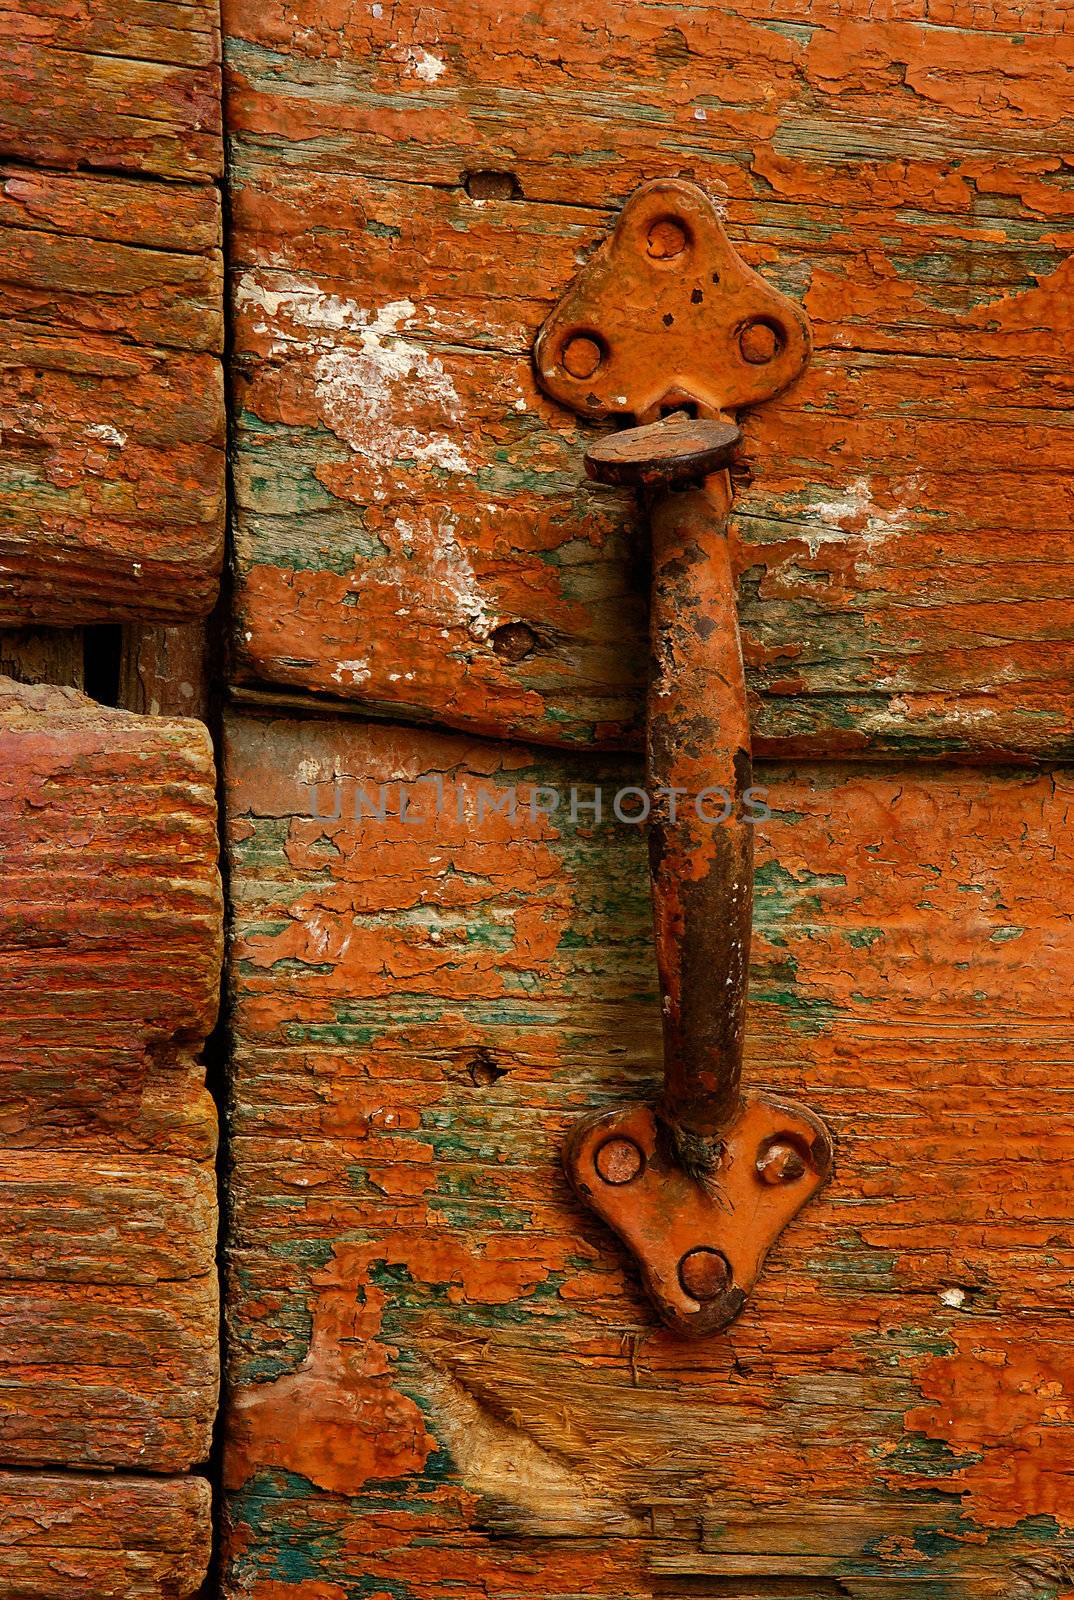 Image shows a rusty handle on a highly textured country door